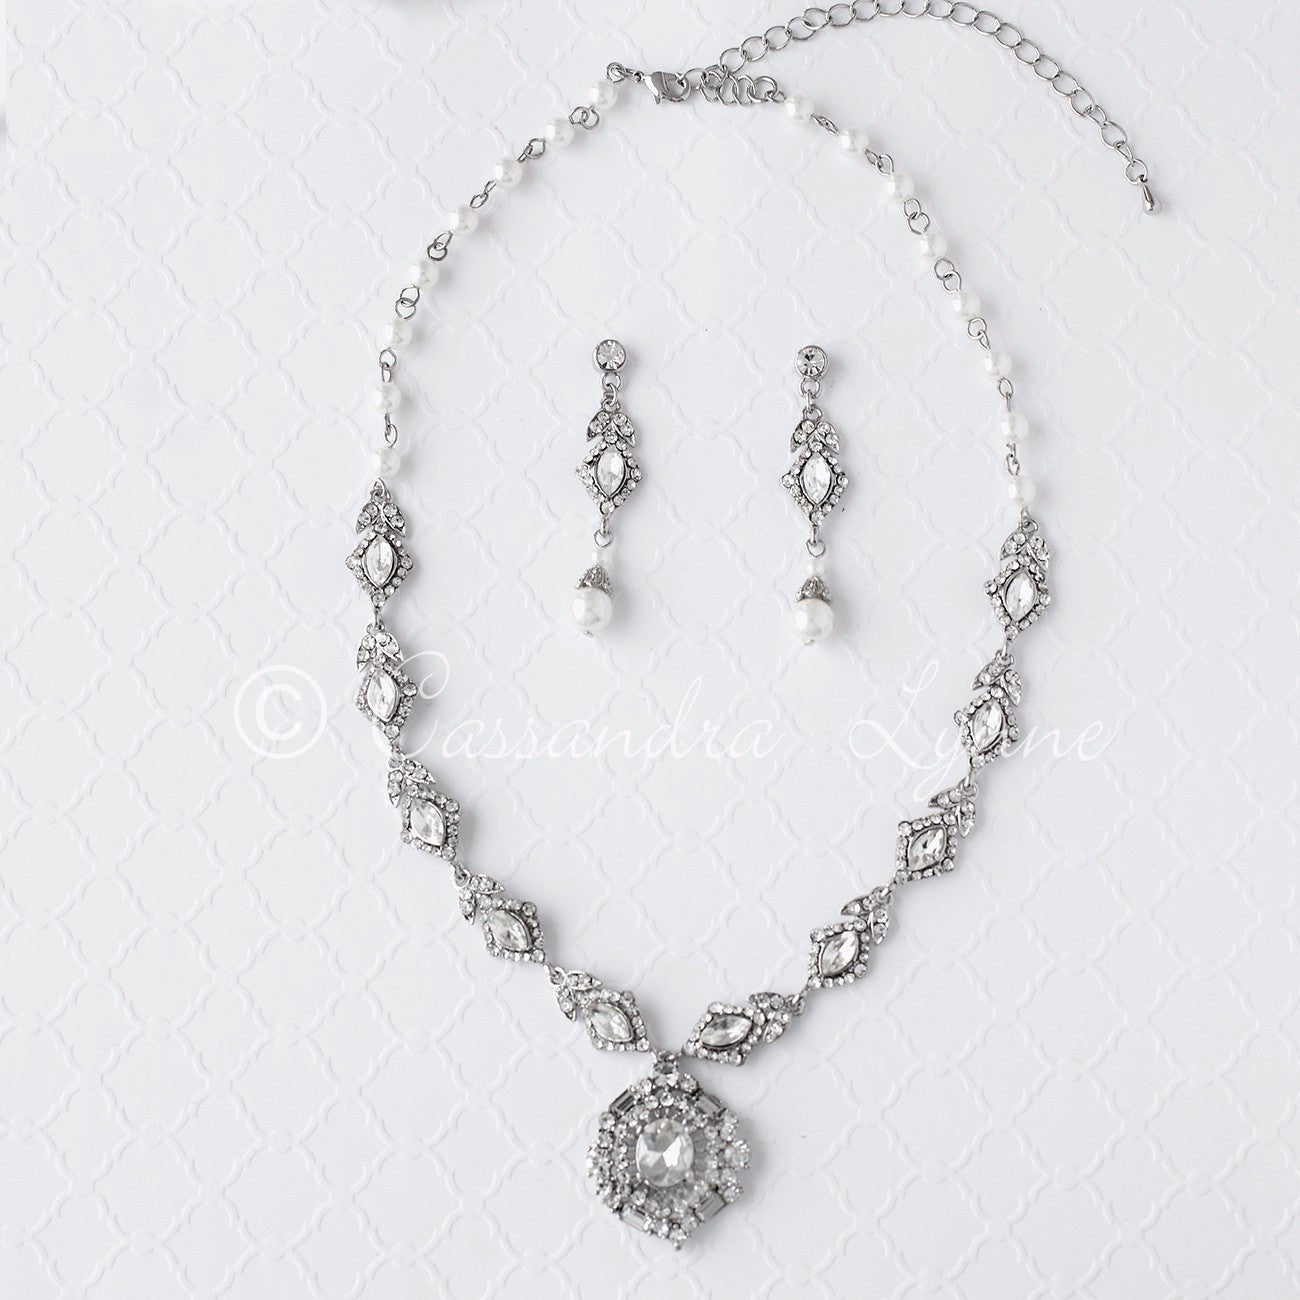 Vintage Wedding Necklace Set of Pearls and Jewels - Cassandra Lynne